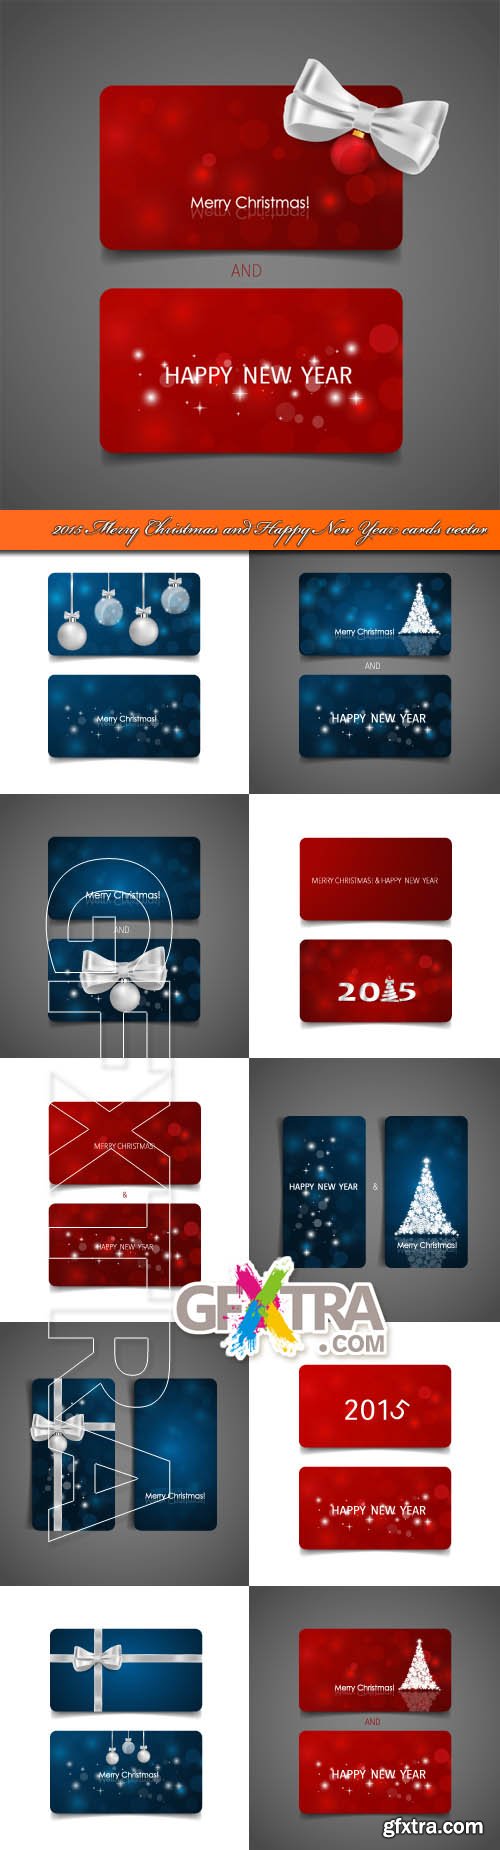 2015 Merry Christmas and Happy New Year cards vector